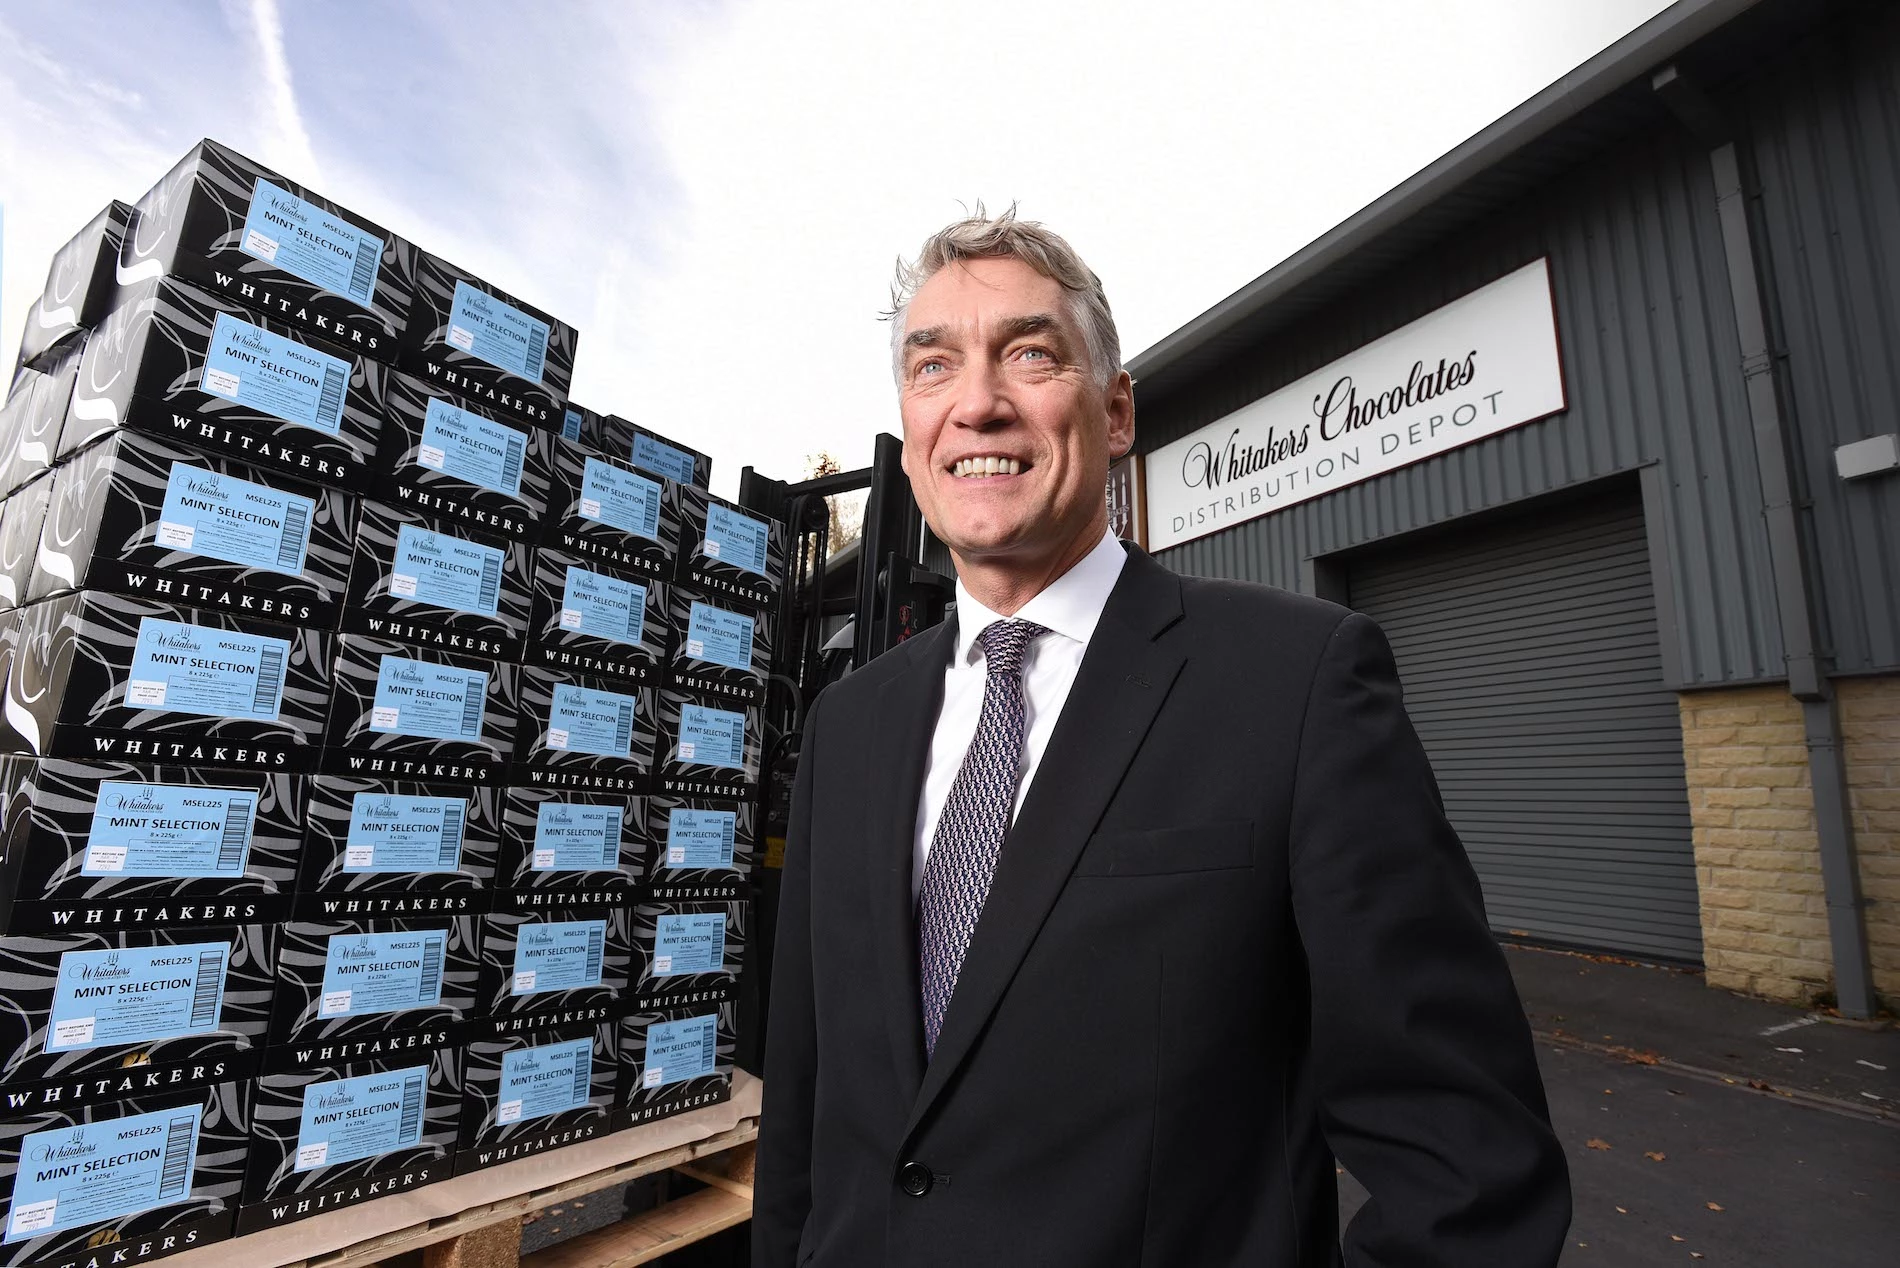 Fourth generation managing director of Whitakers Chocolates, William Whitaker.